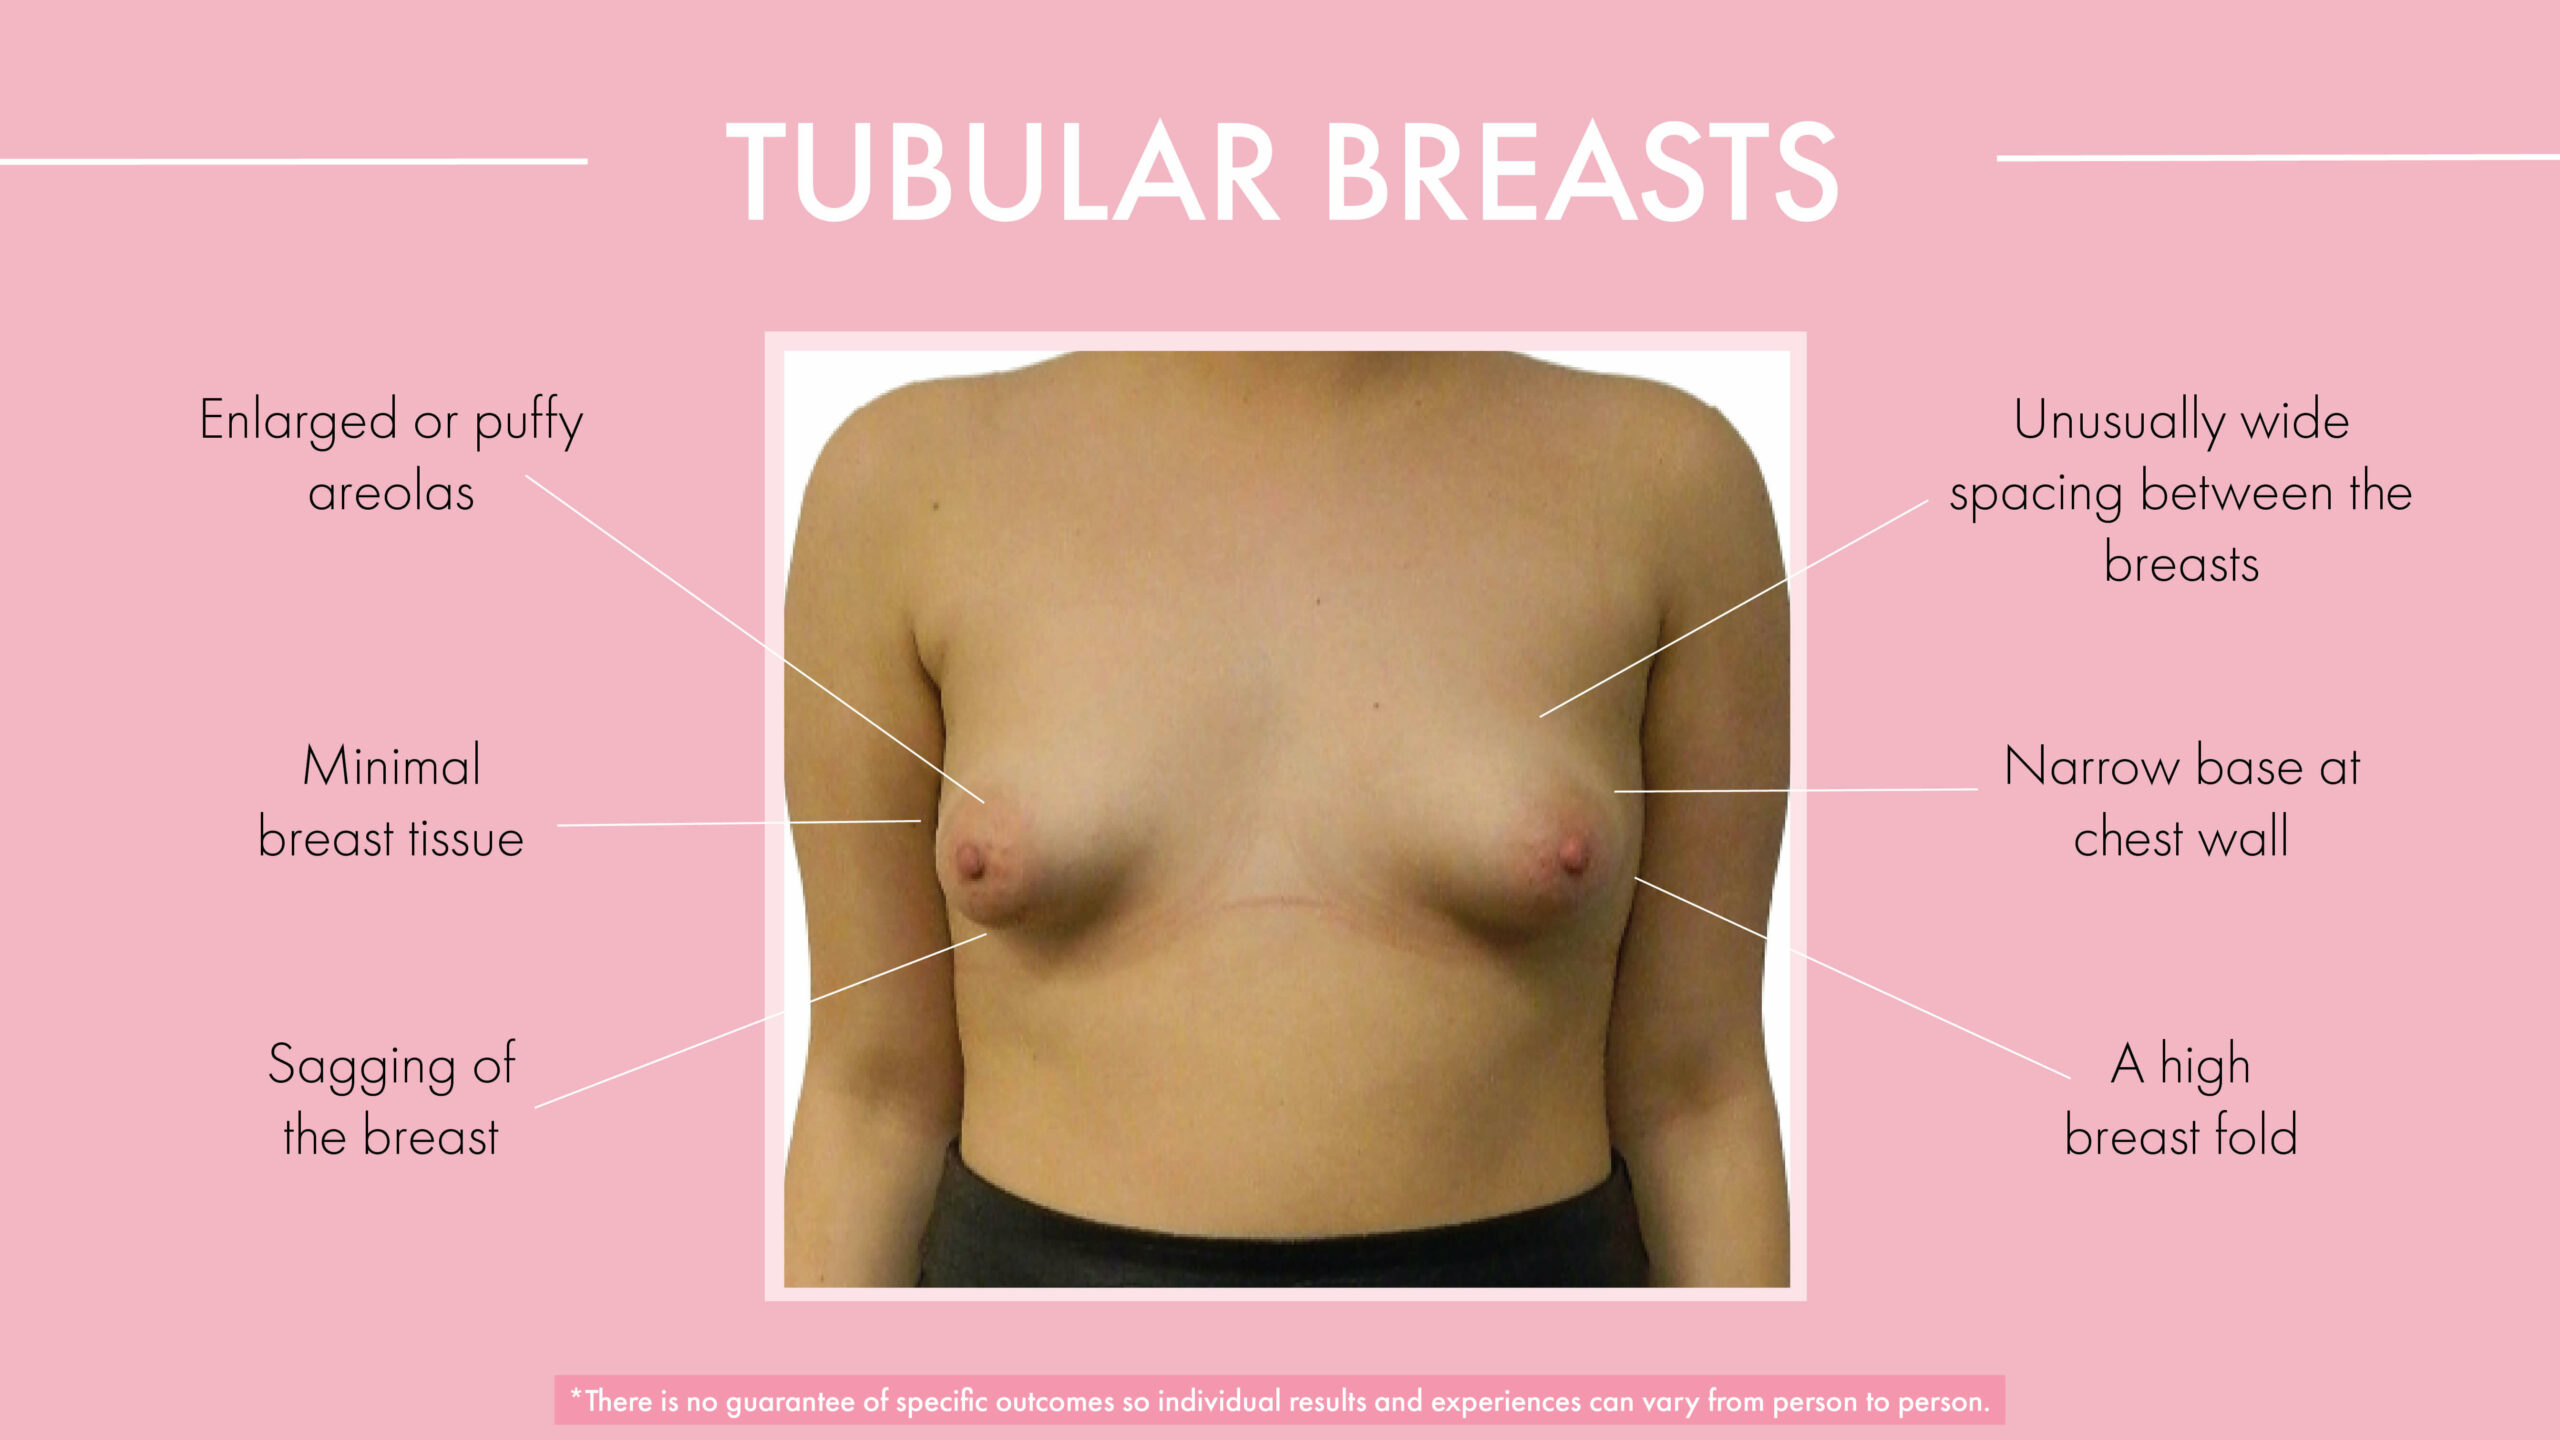 Tubular breast features and characteristics 